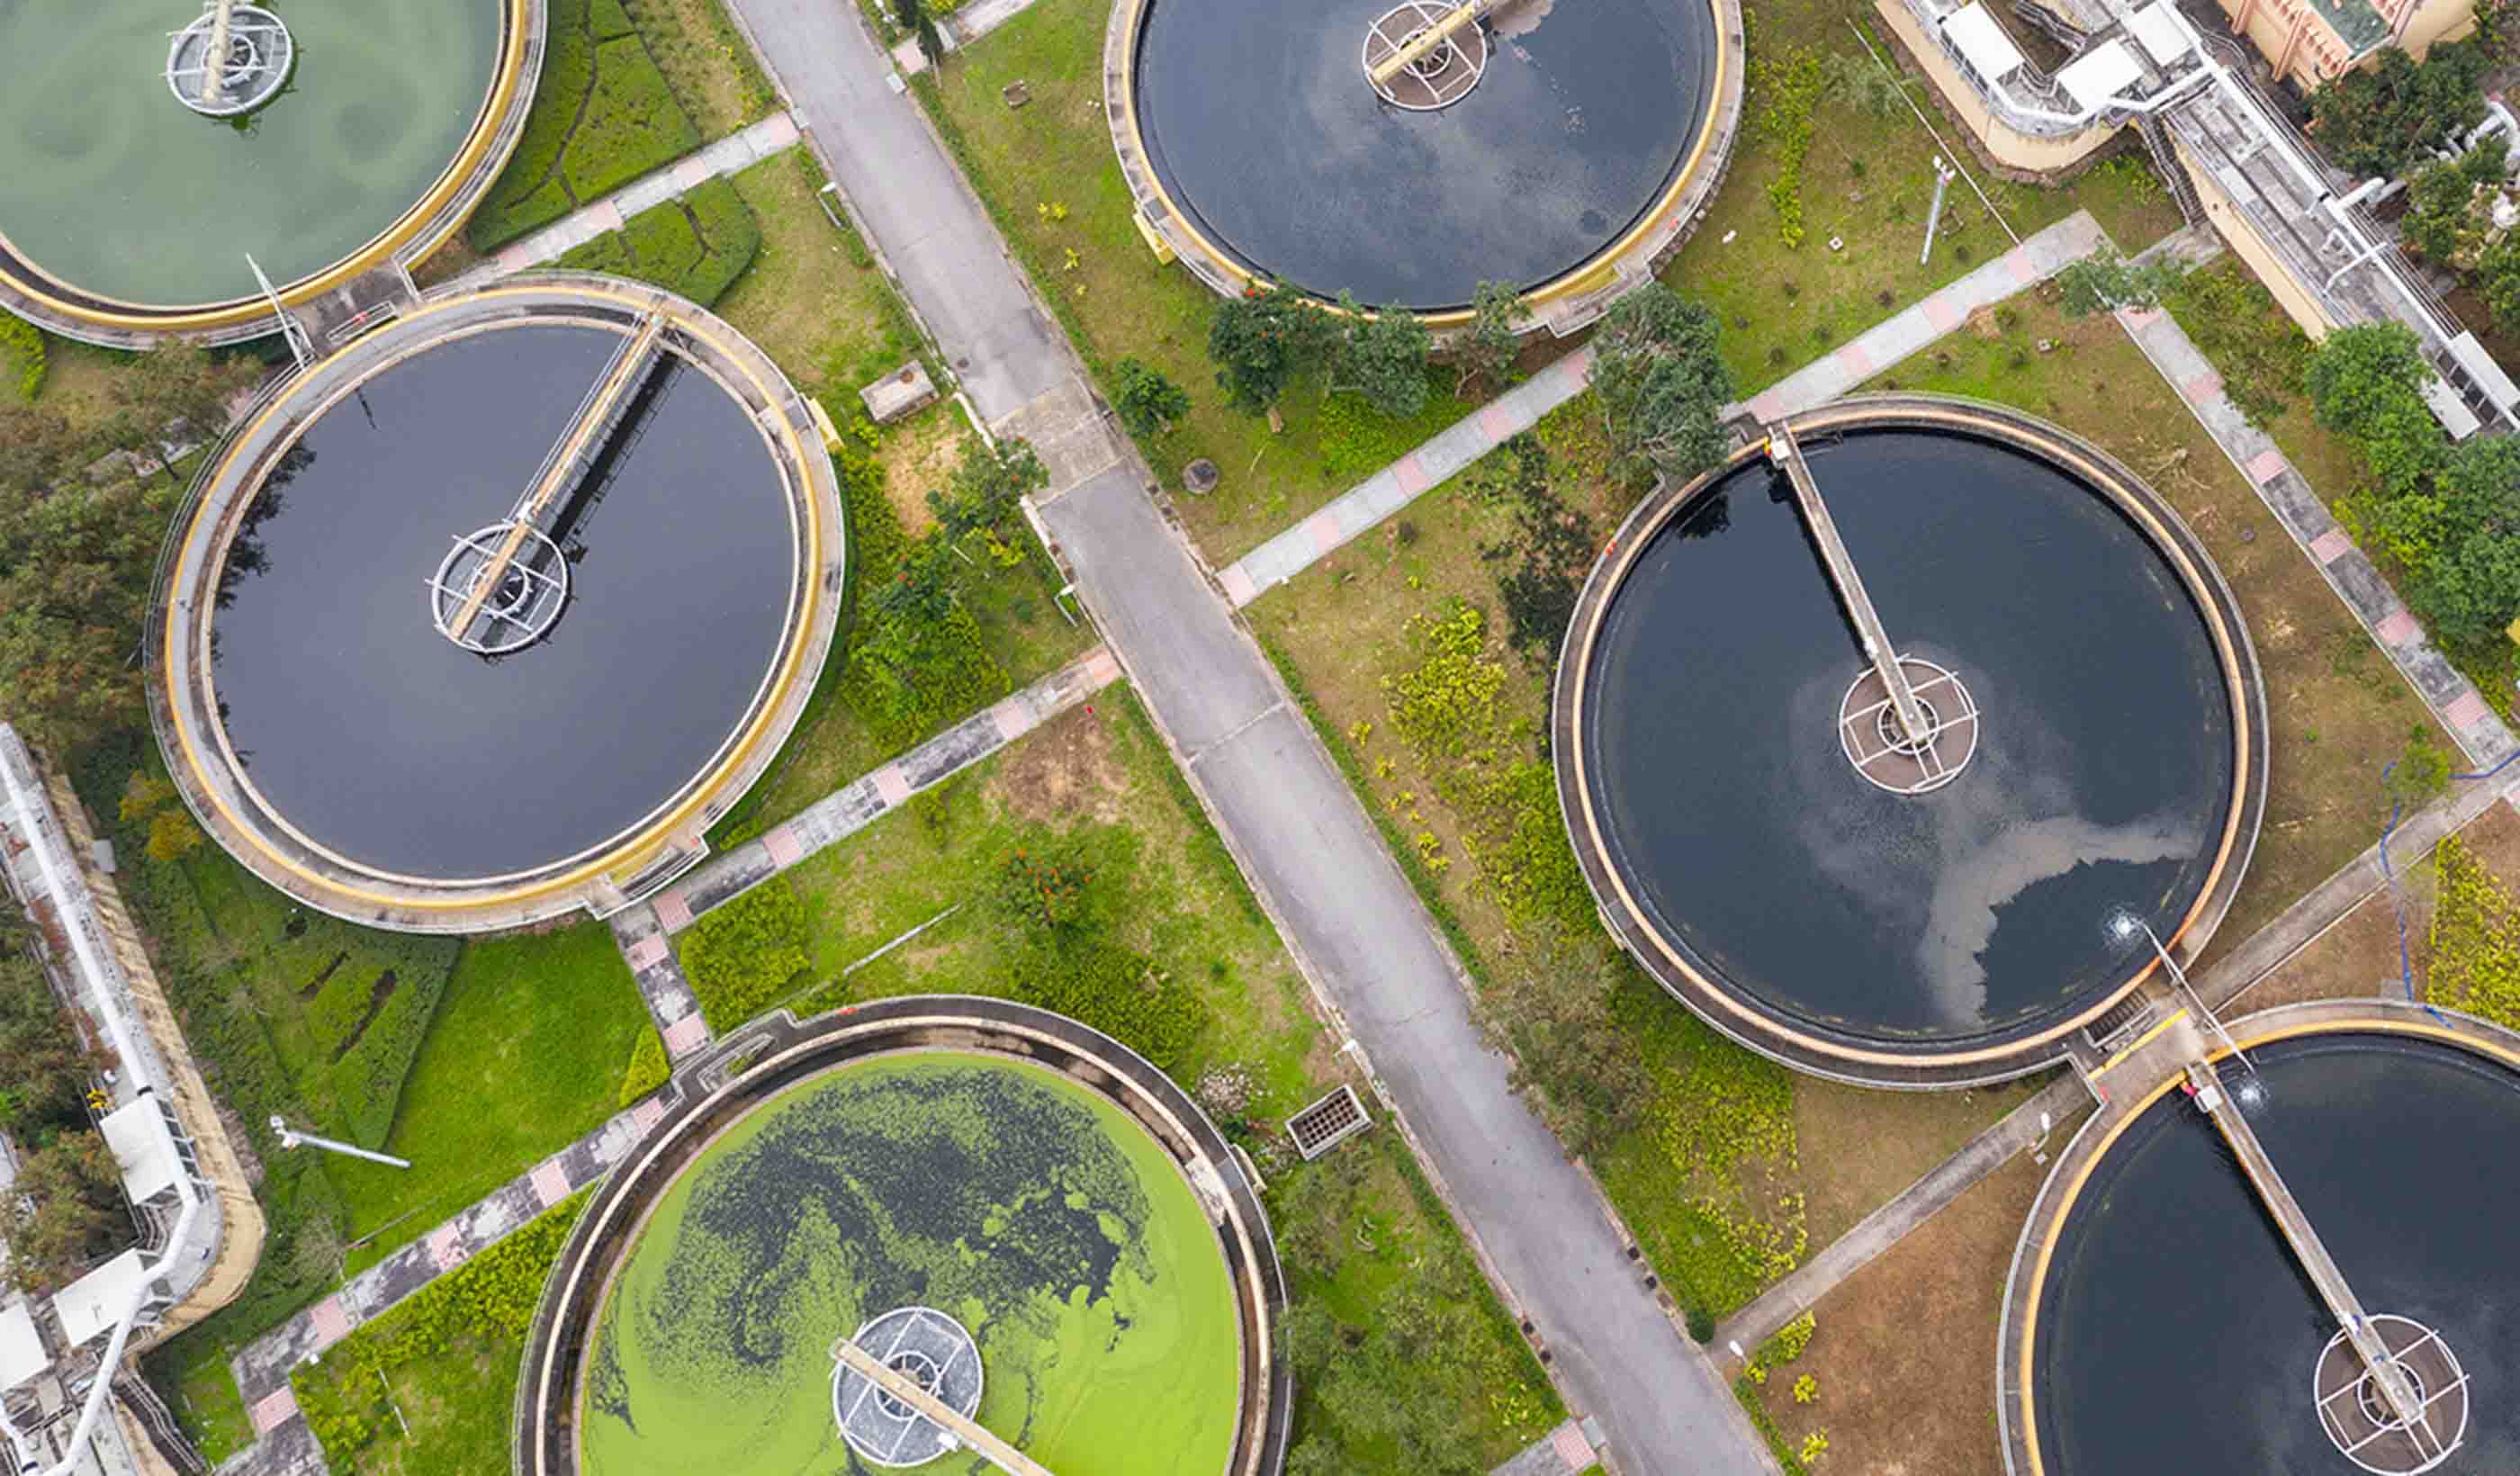 The water industry is feeling the climate change squeeze